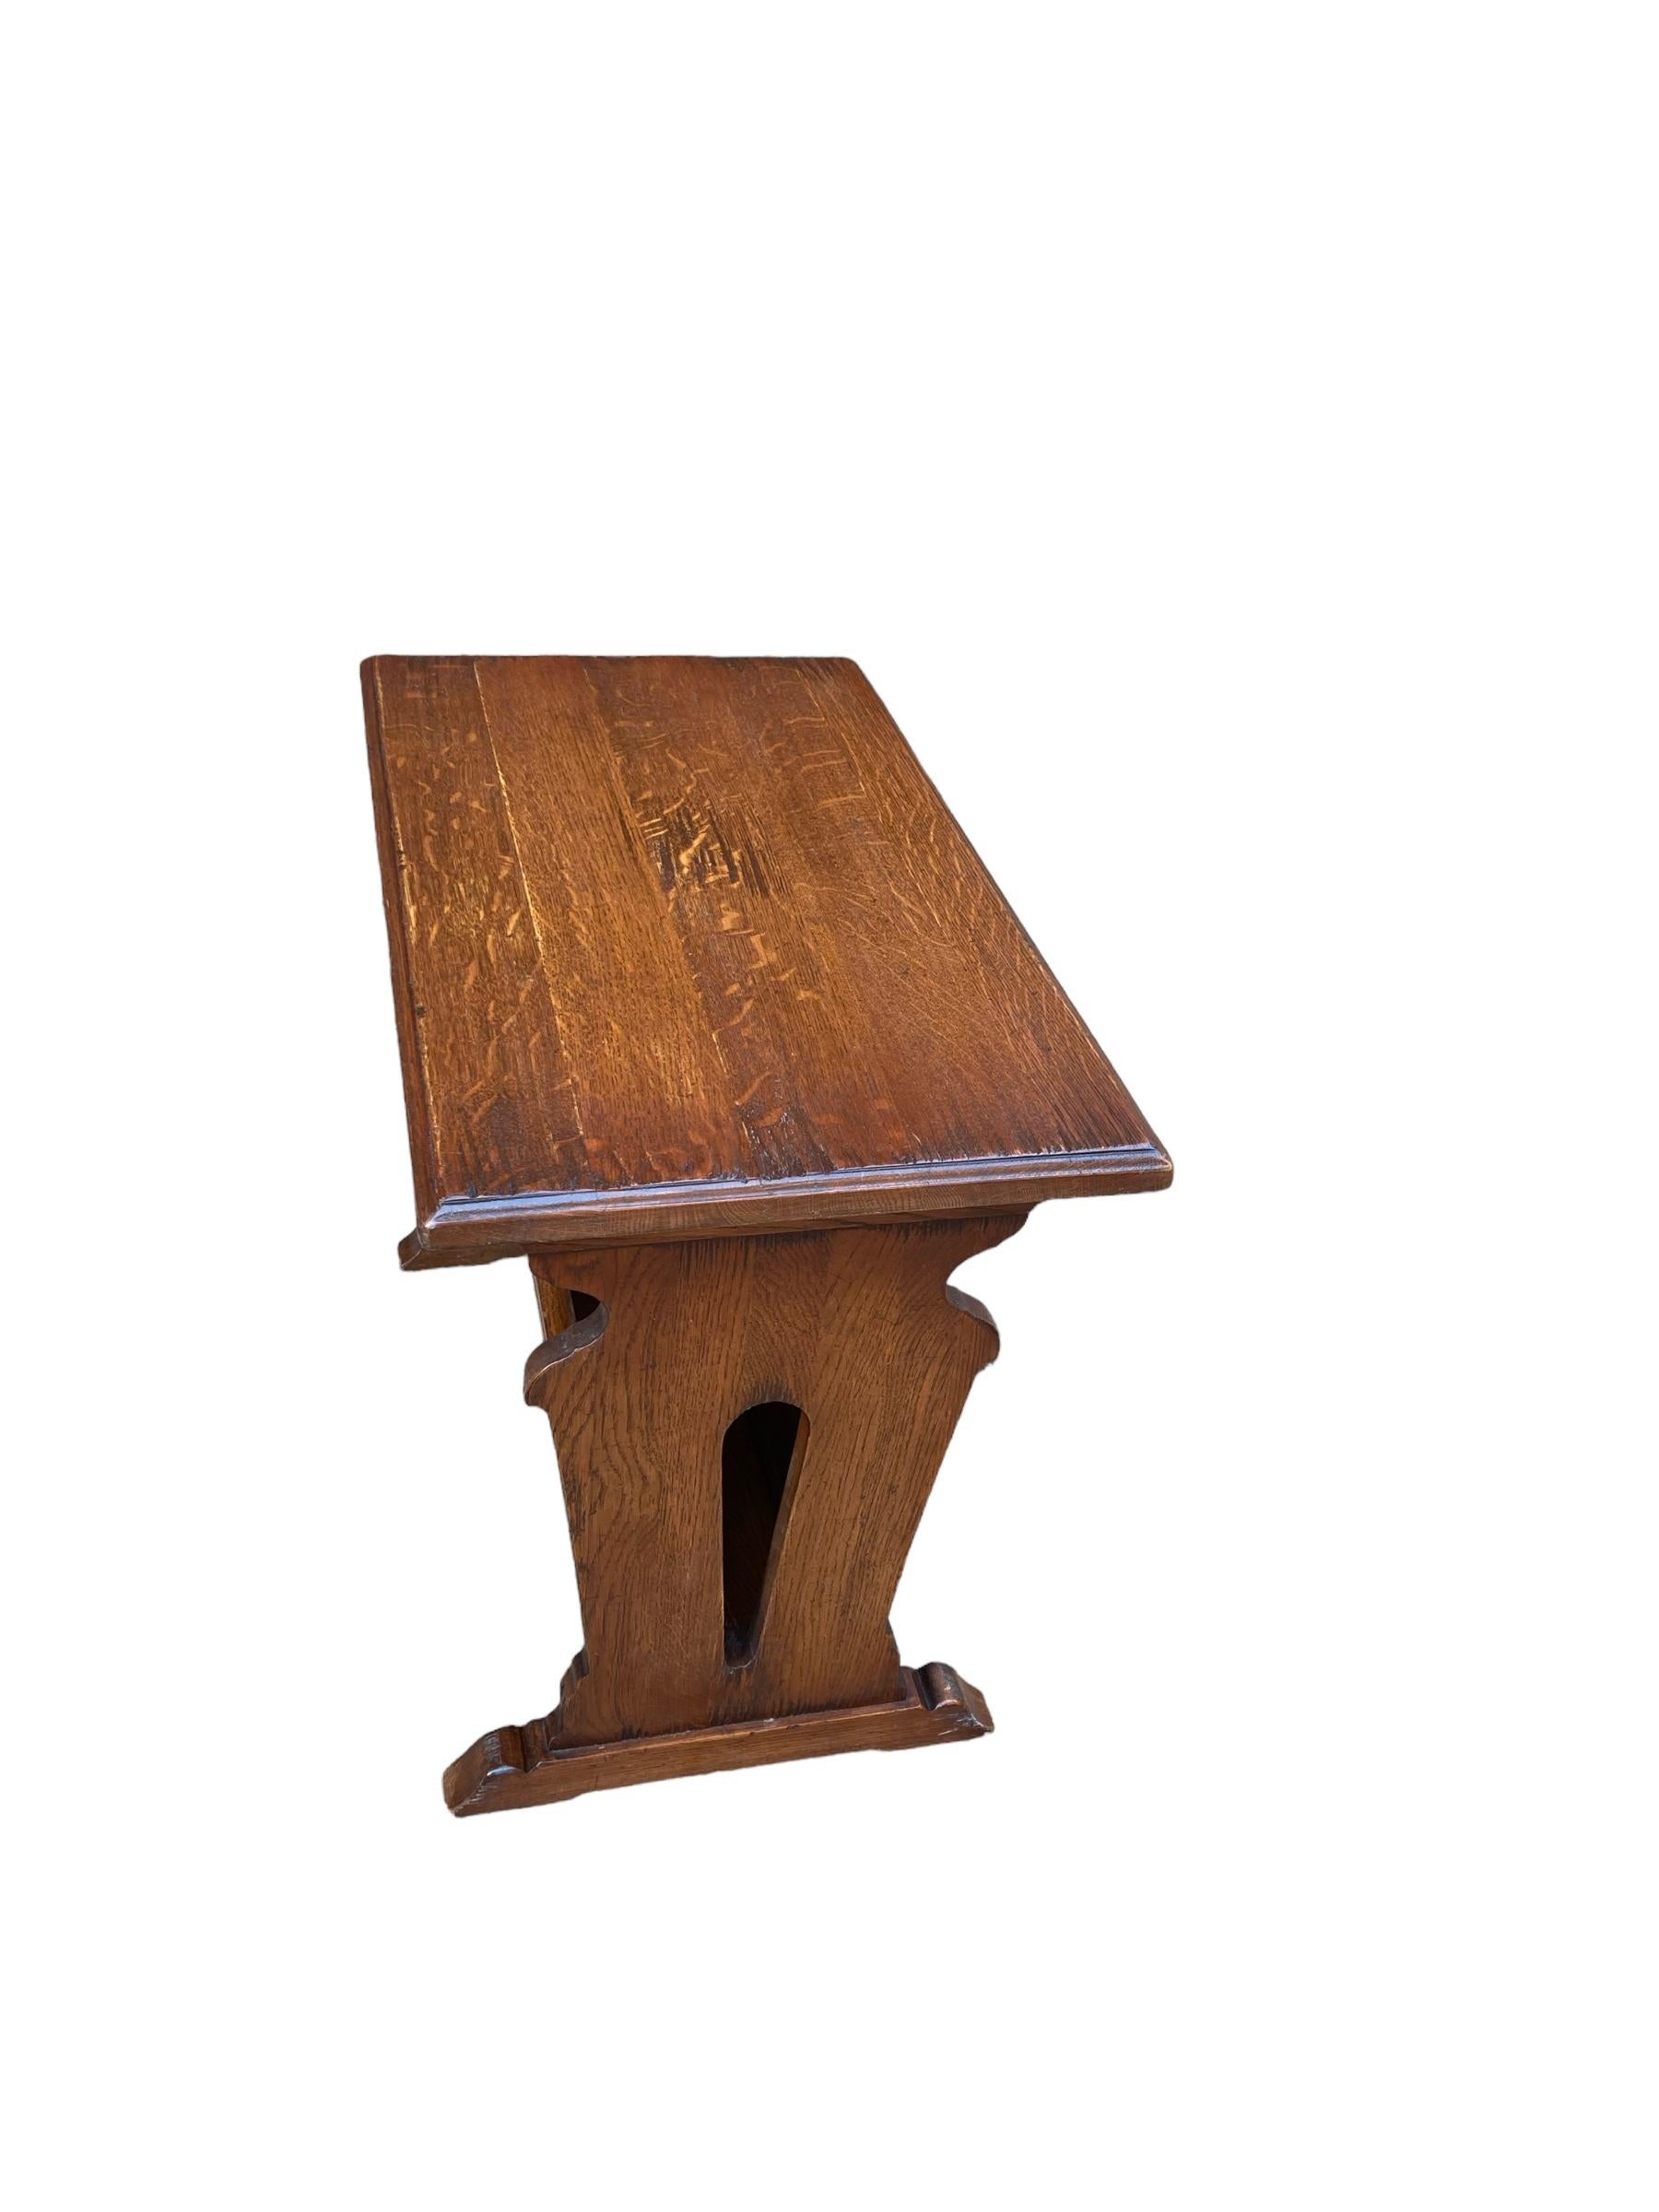 Rustic Old Charm Carved Oak small coffee, side table Magazine Rack